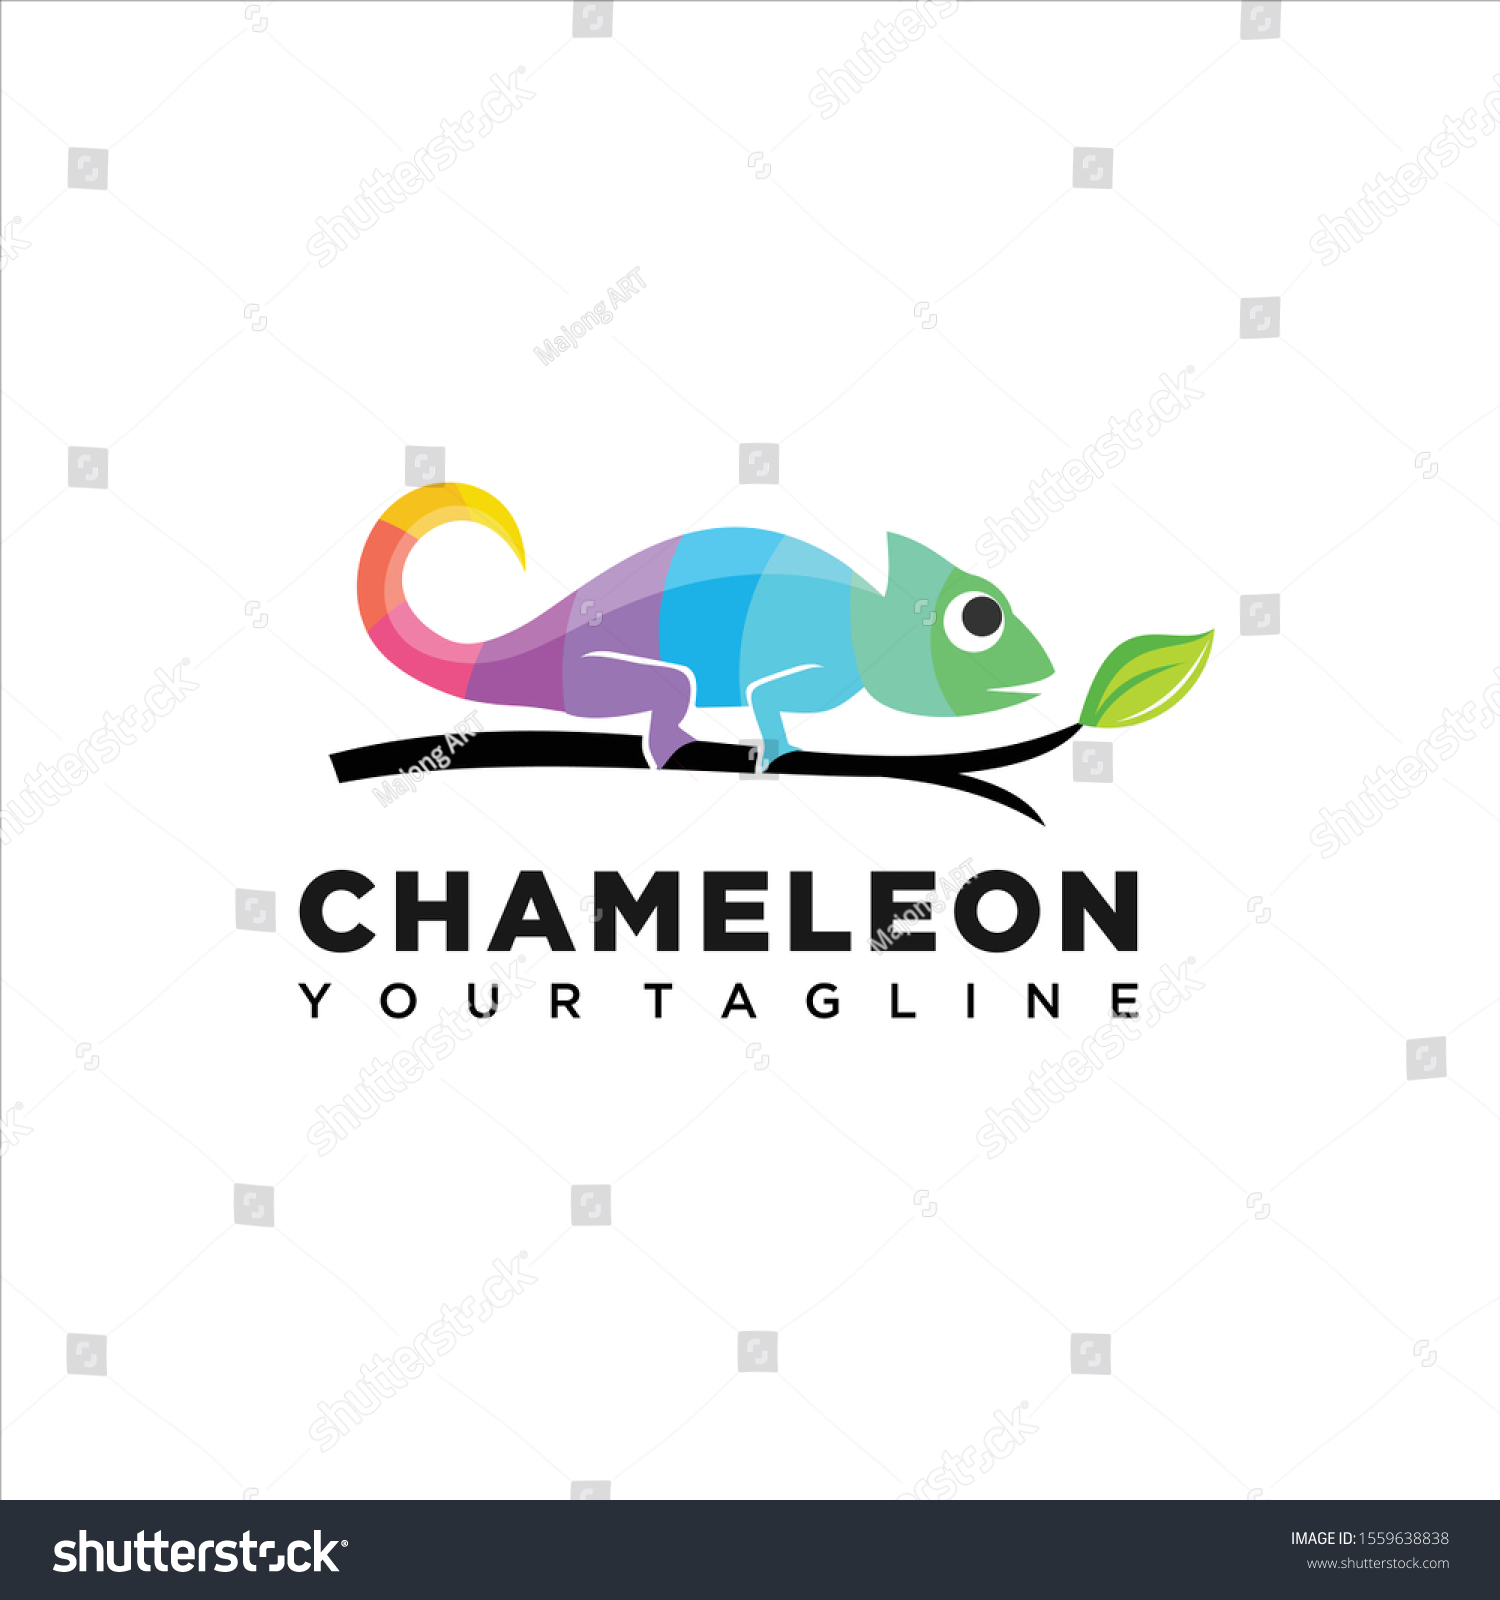 SVG of Chameleon Colorful Design concept Illustration Vector Template, Suitable for Creative Industry, Multimedia, entertainment, Educations, Shop, and any related business svg